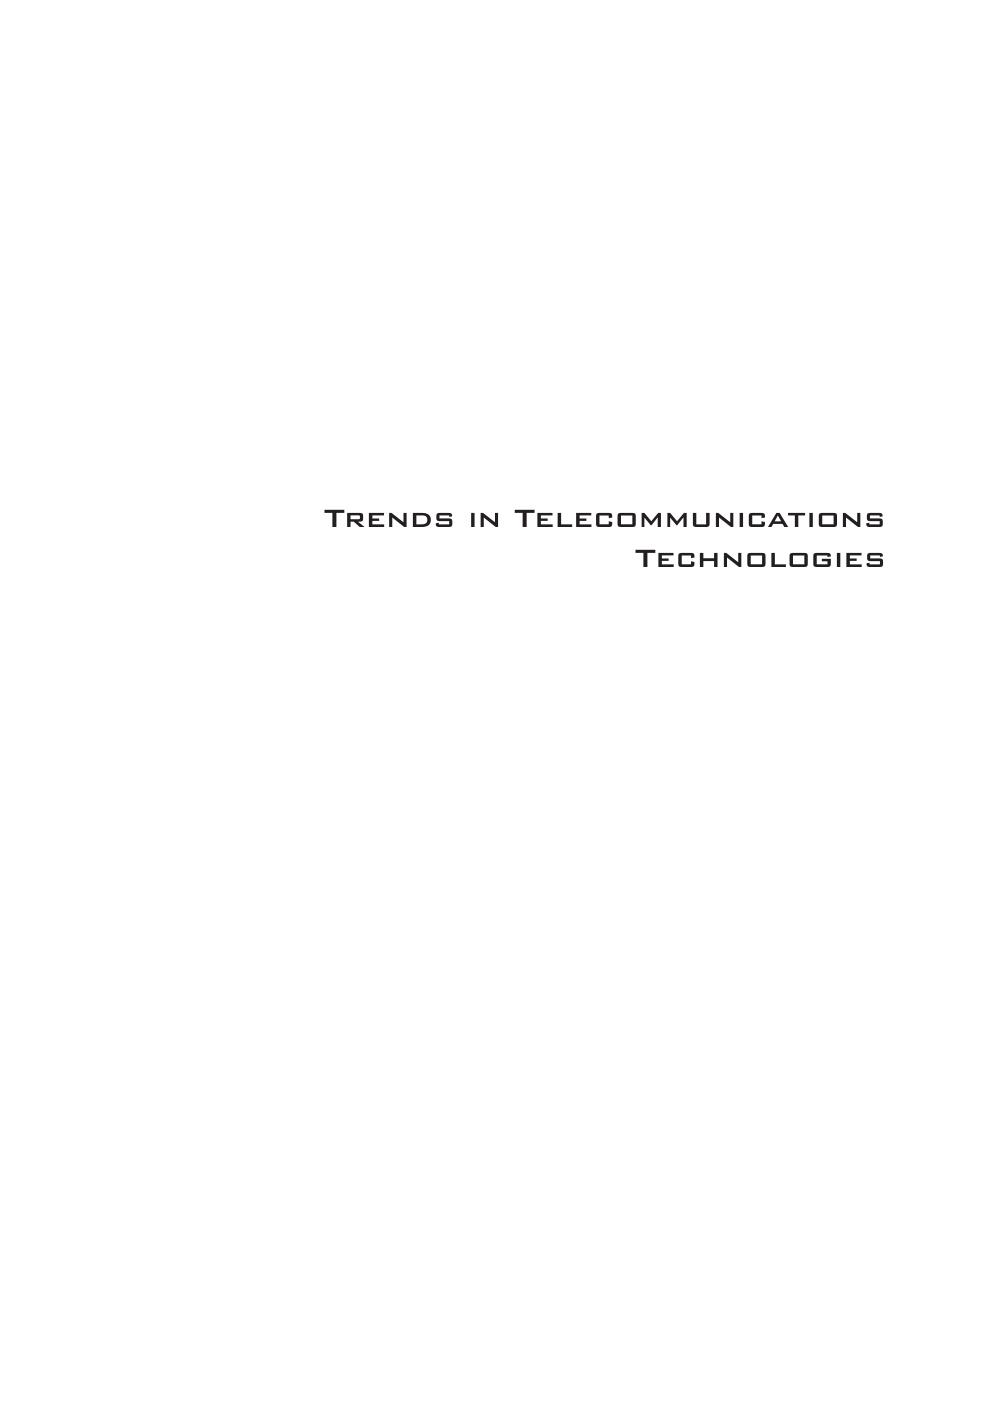 Trends in Telecommunications Technologies 2010.pdf